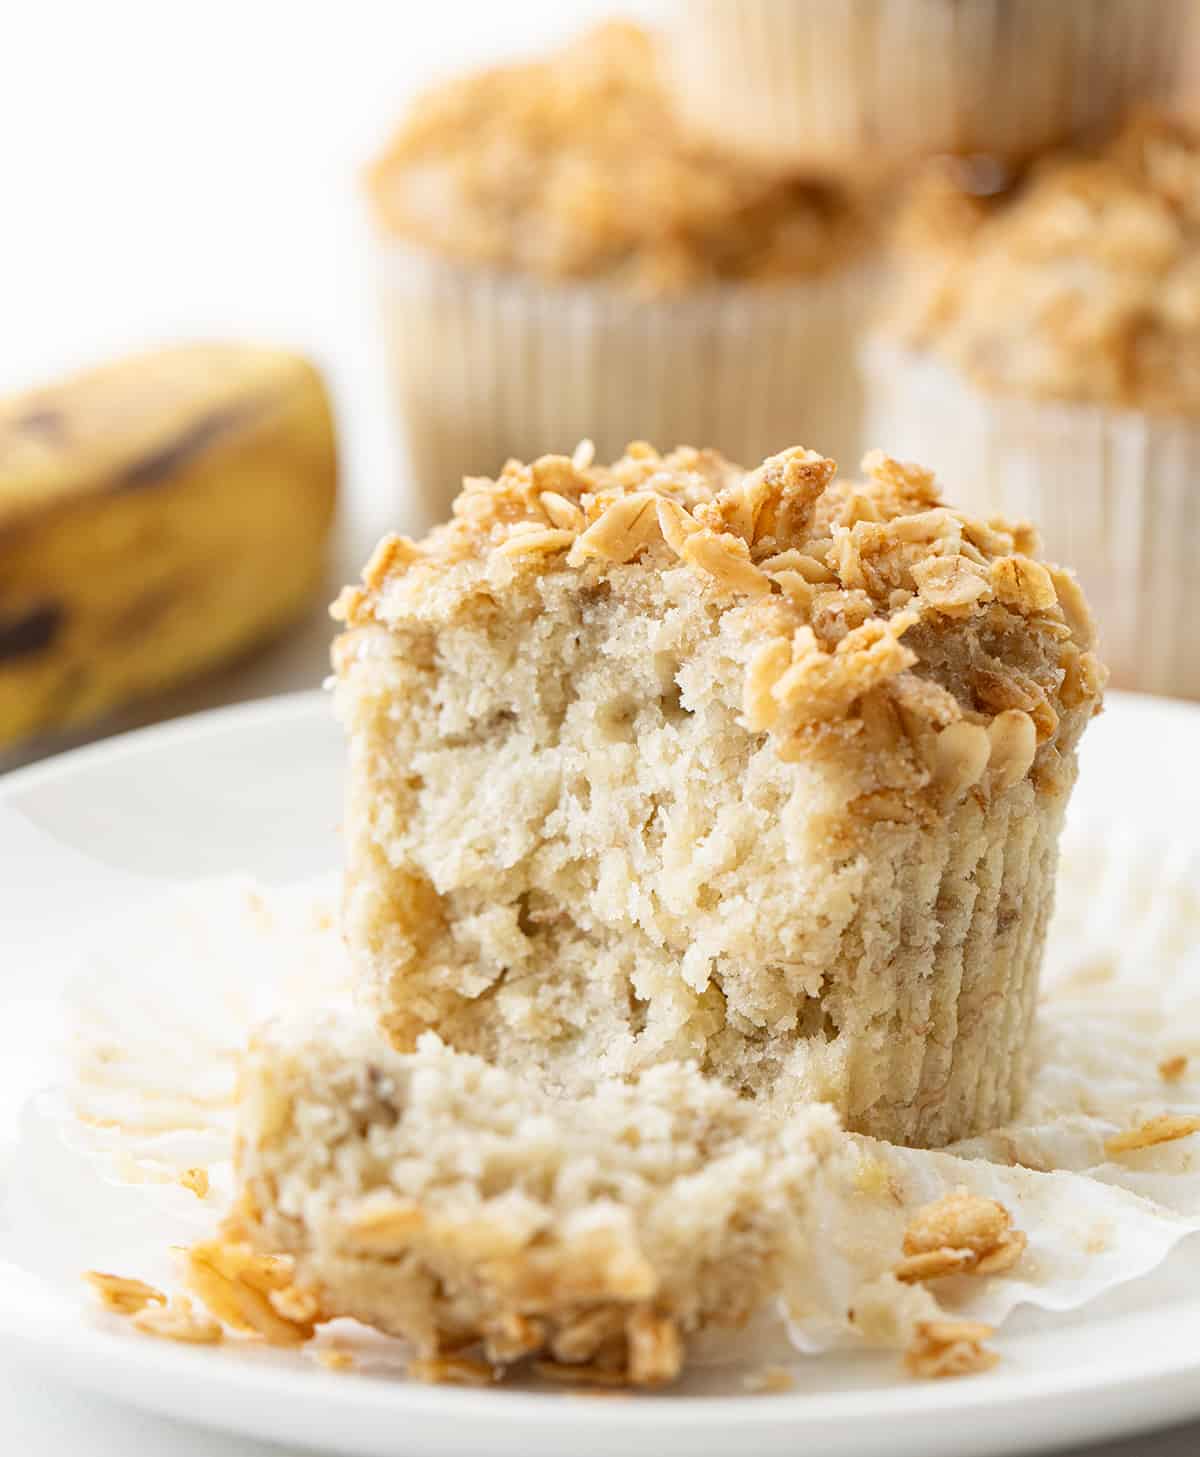 One Banana Crunch Muffin on a Counter with Some Stacked Behind Near a Banana and Some of the Muffin Removed Showing Inside Texture.